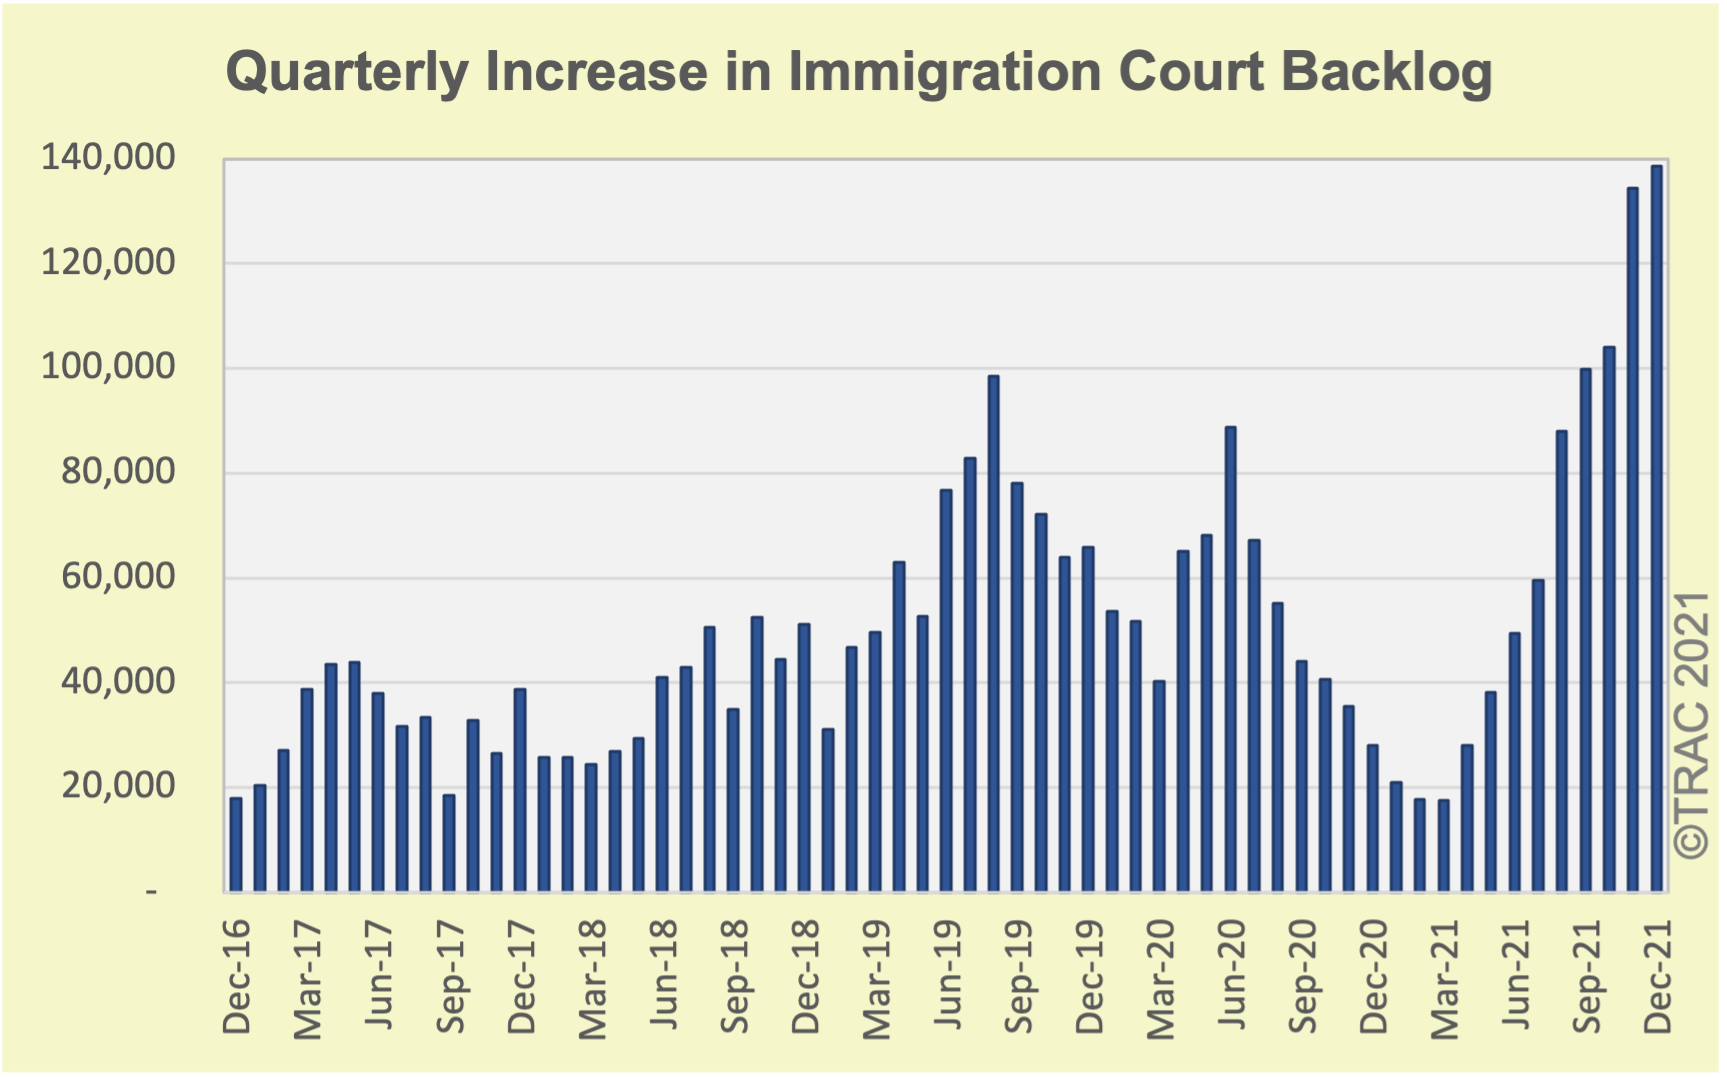 U.S. Immigration Court Faces Biggest Backlog Ever, with 1.5M Cases Pending